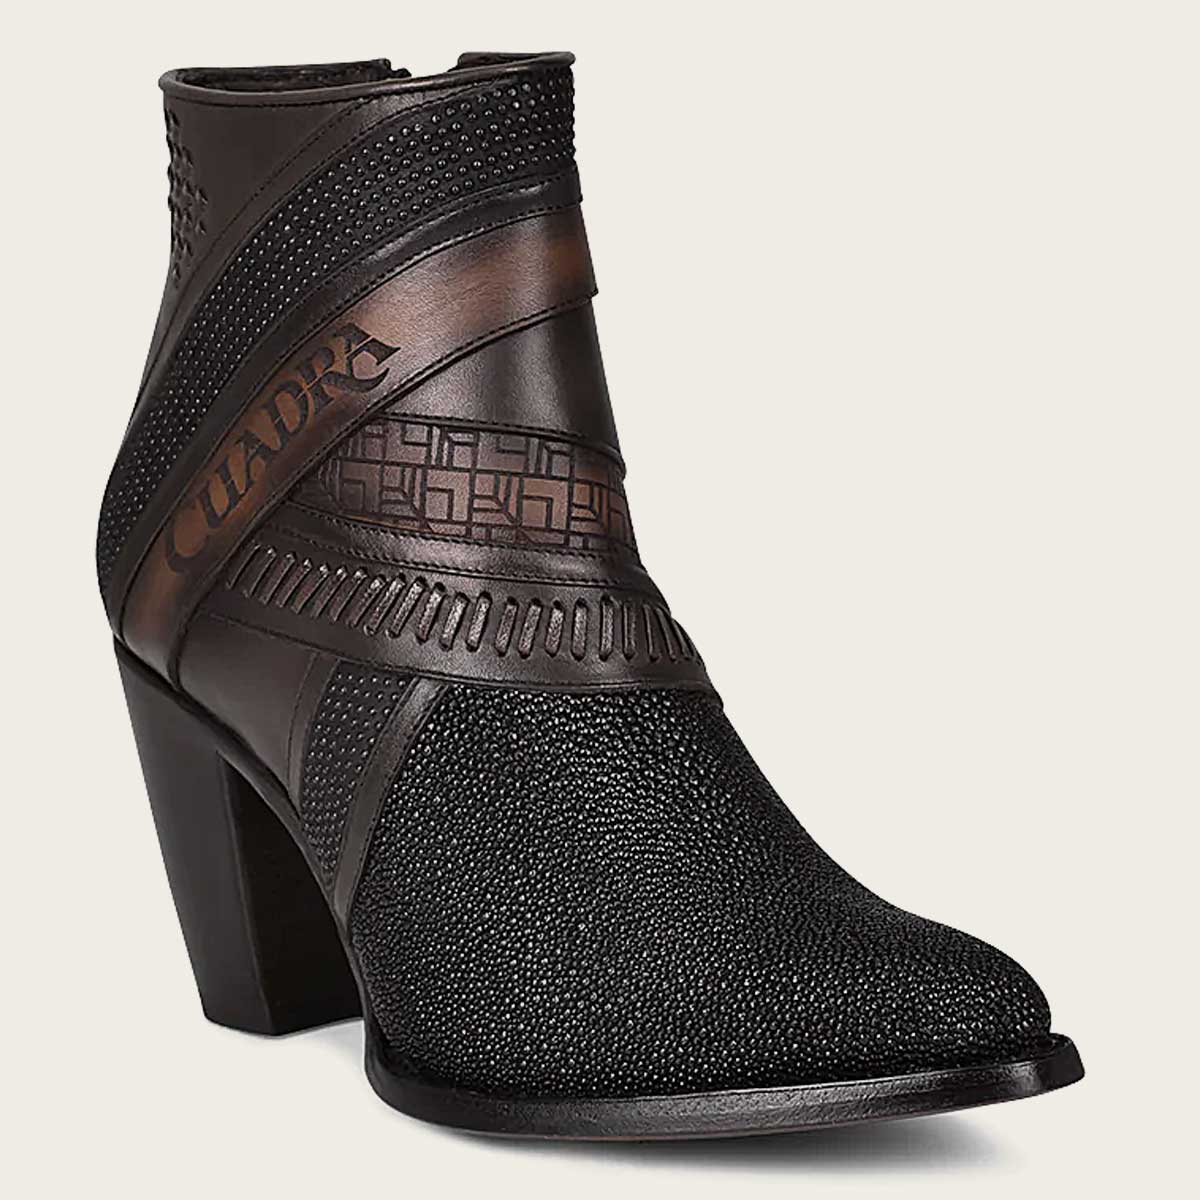 Cuadra Hand Painted Exotic Black Stingray Leather Bootie